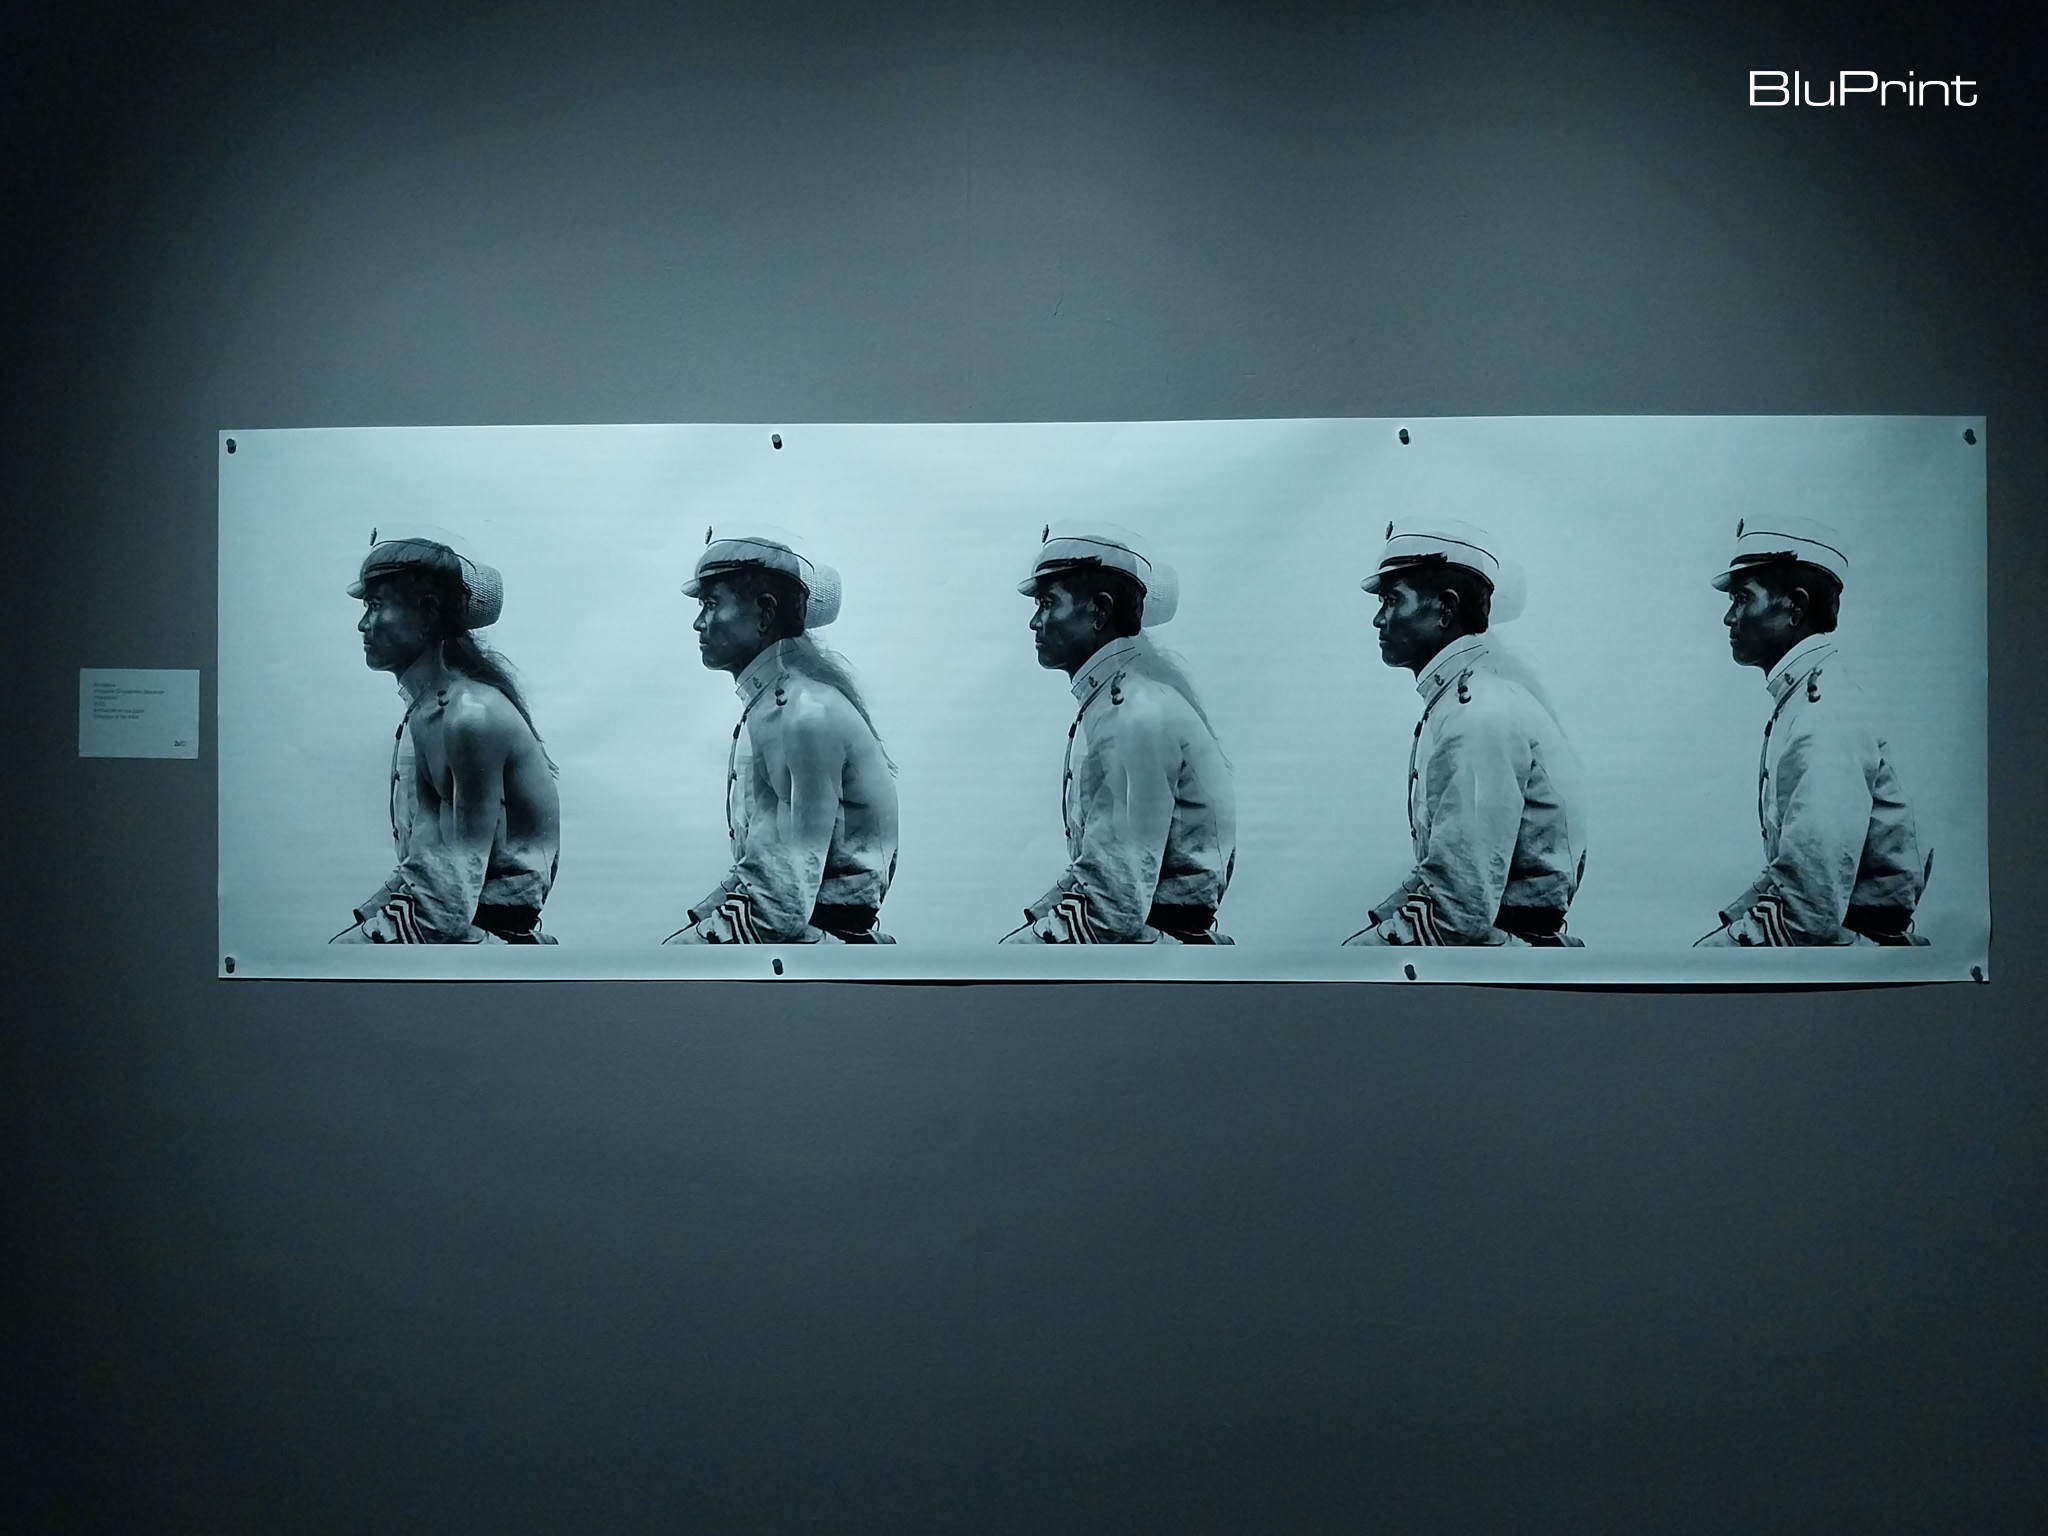 Image of Kiri Dalena's "Sequence" at the "Snare for Birds" exhibit in Ateneo Art Gallery. Photo by Patricia F. Yap.